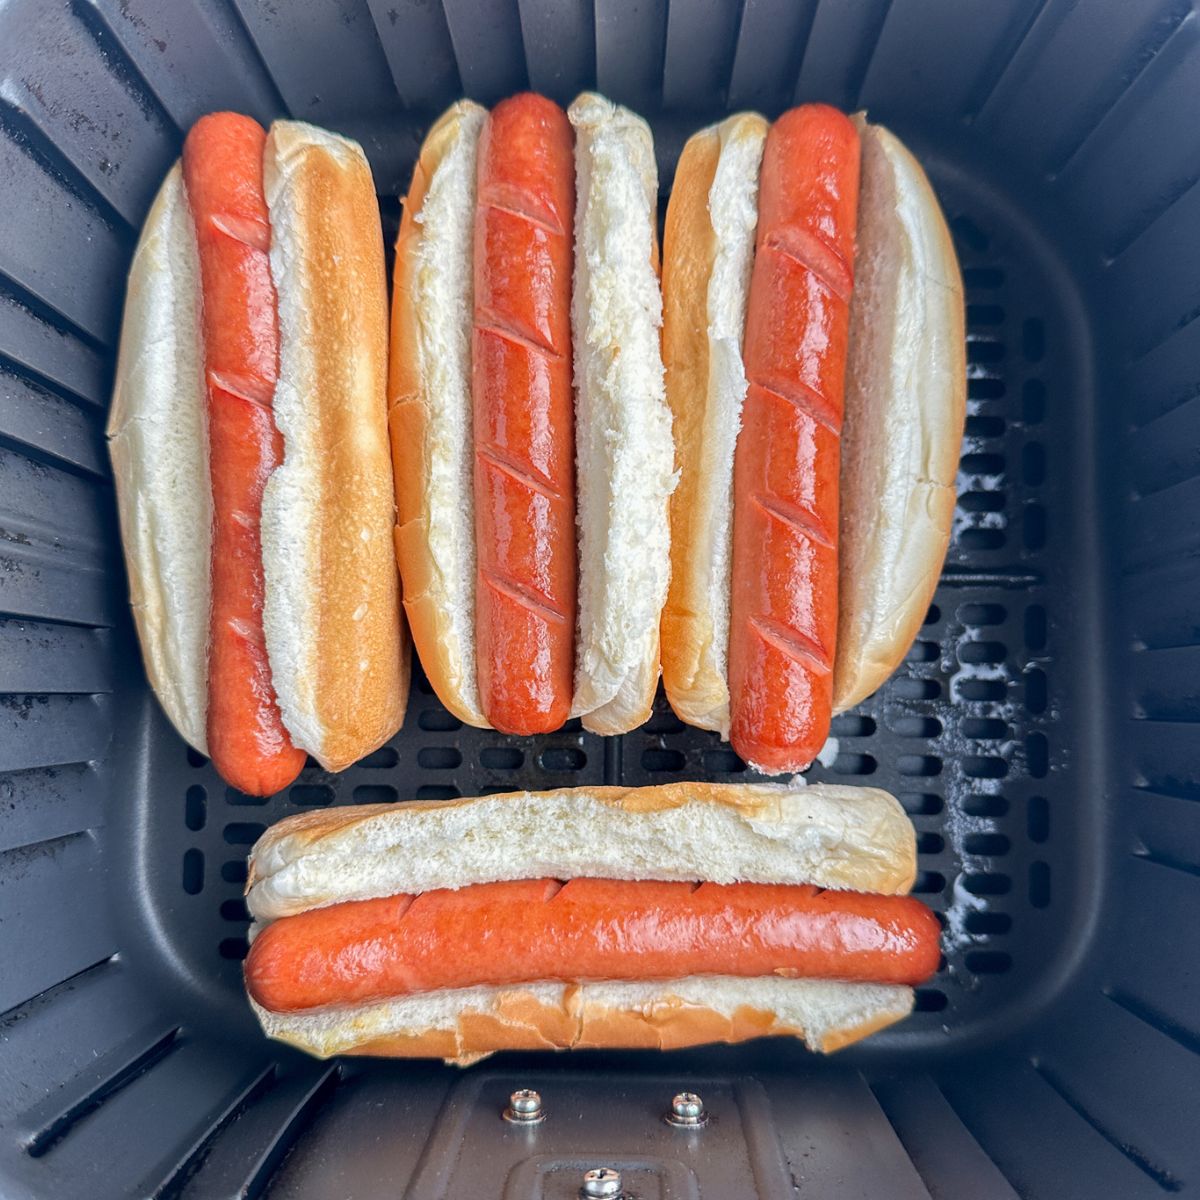 Hot dogs in buns in the air fryer. 